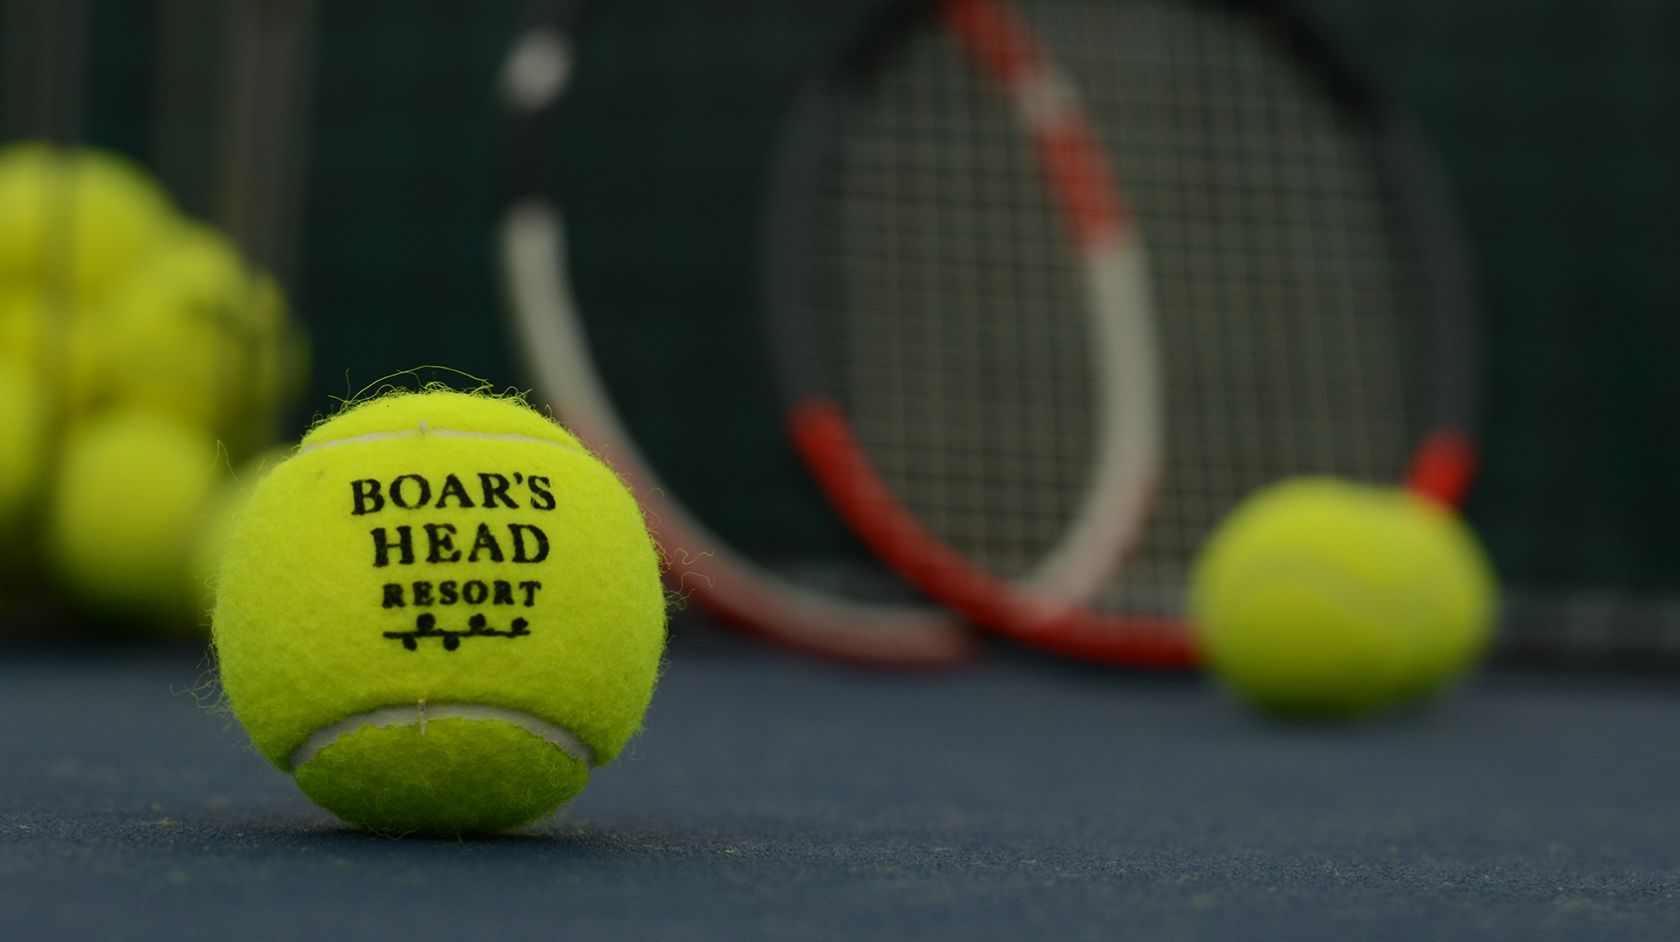 A Tennis Ball On A Court With A Racket